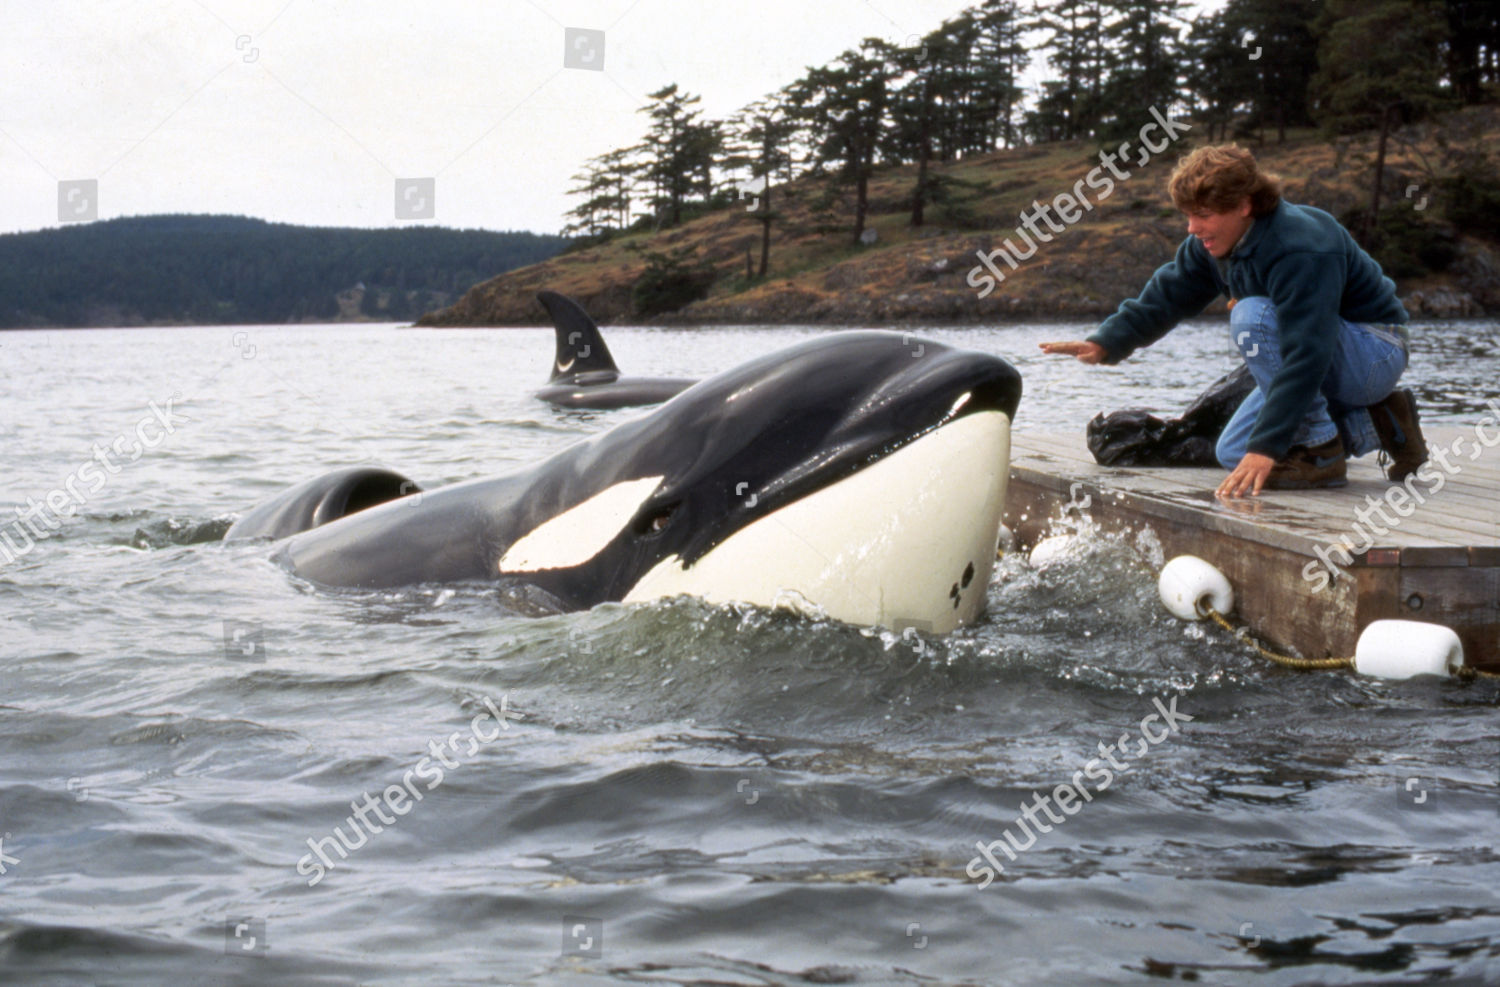 free willy 2 the adventure home full movie